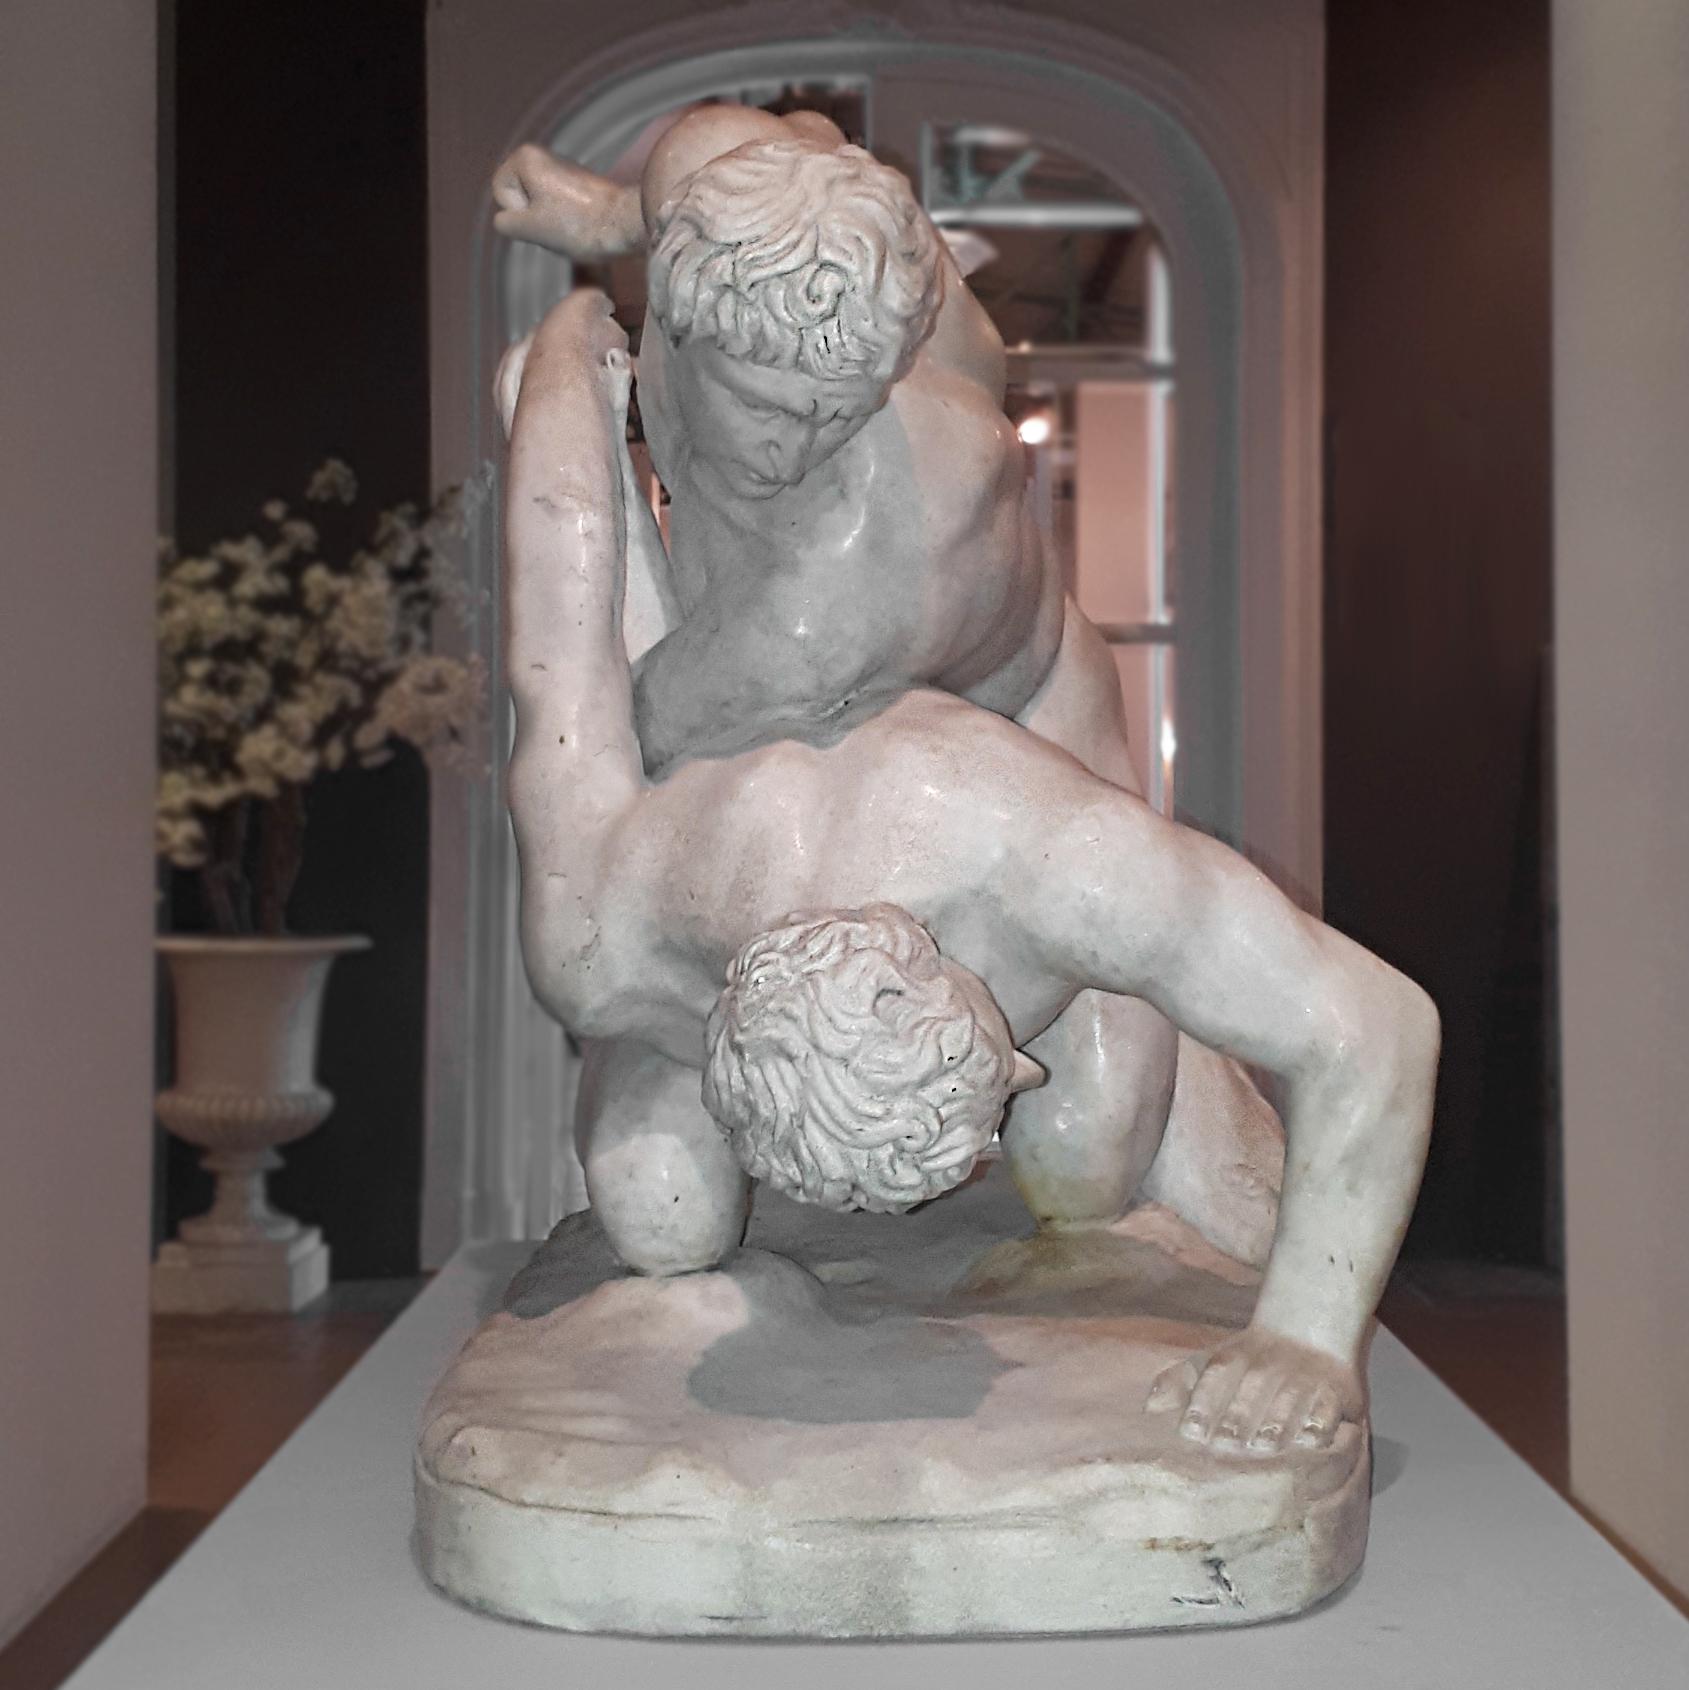 Carved 19th Century Grand Tour Marble Sculpture after the Antique Uffizi Wrestlers